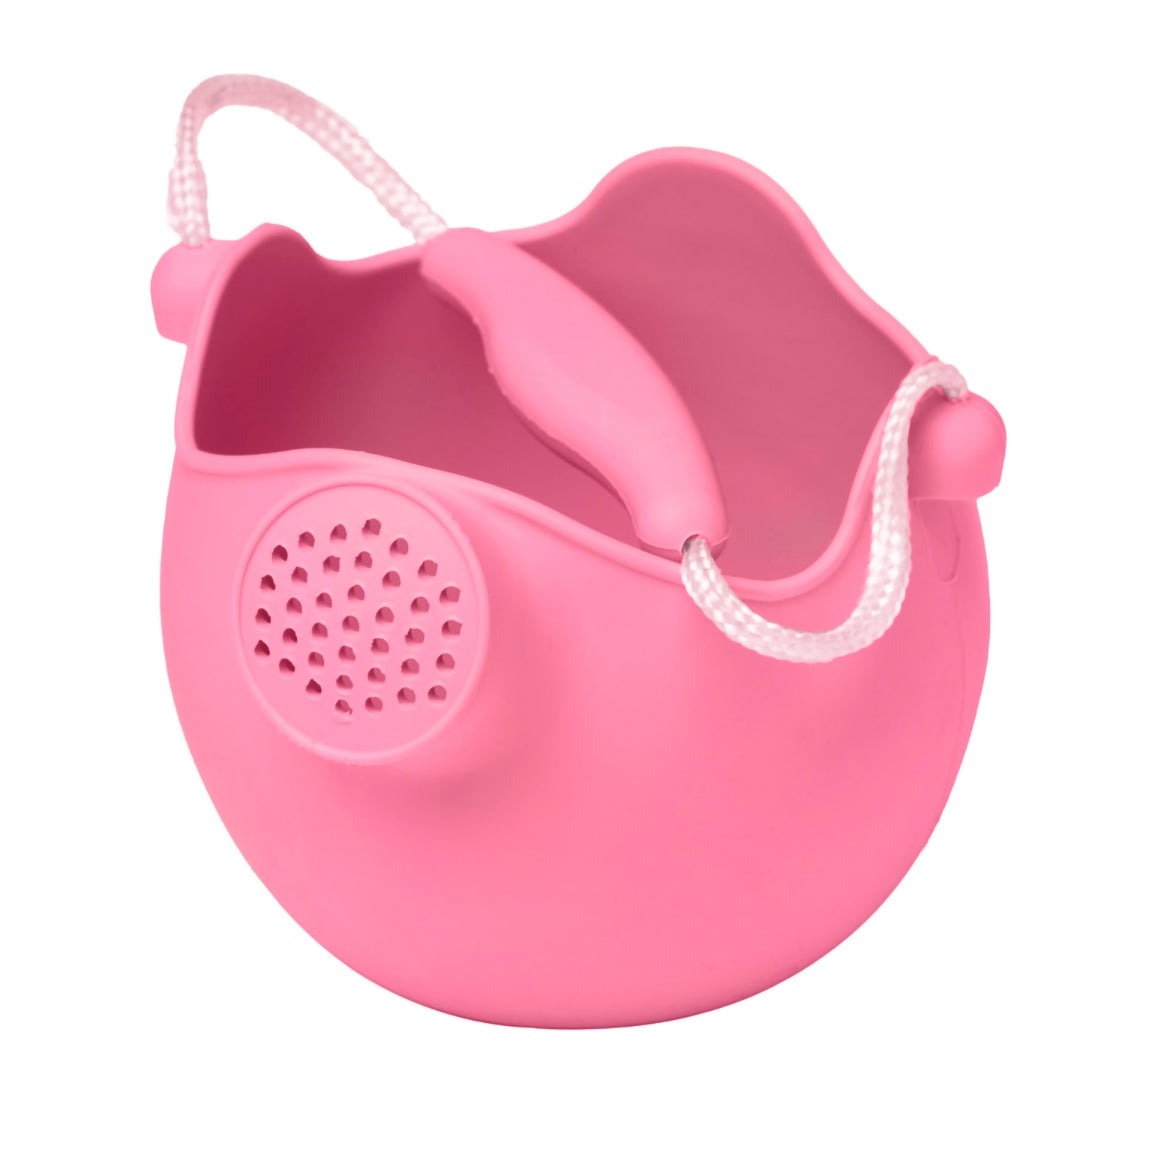 Scrunch Watering Can in Flamingo Pink | Scrunch Beach Toys available at Bear & Moo